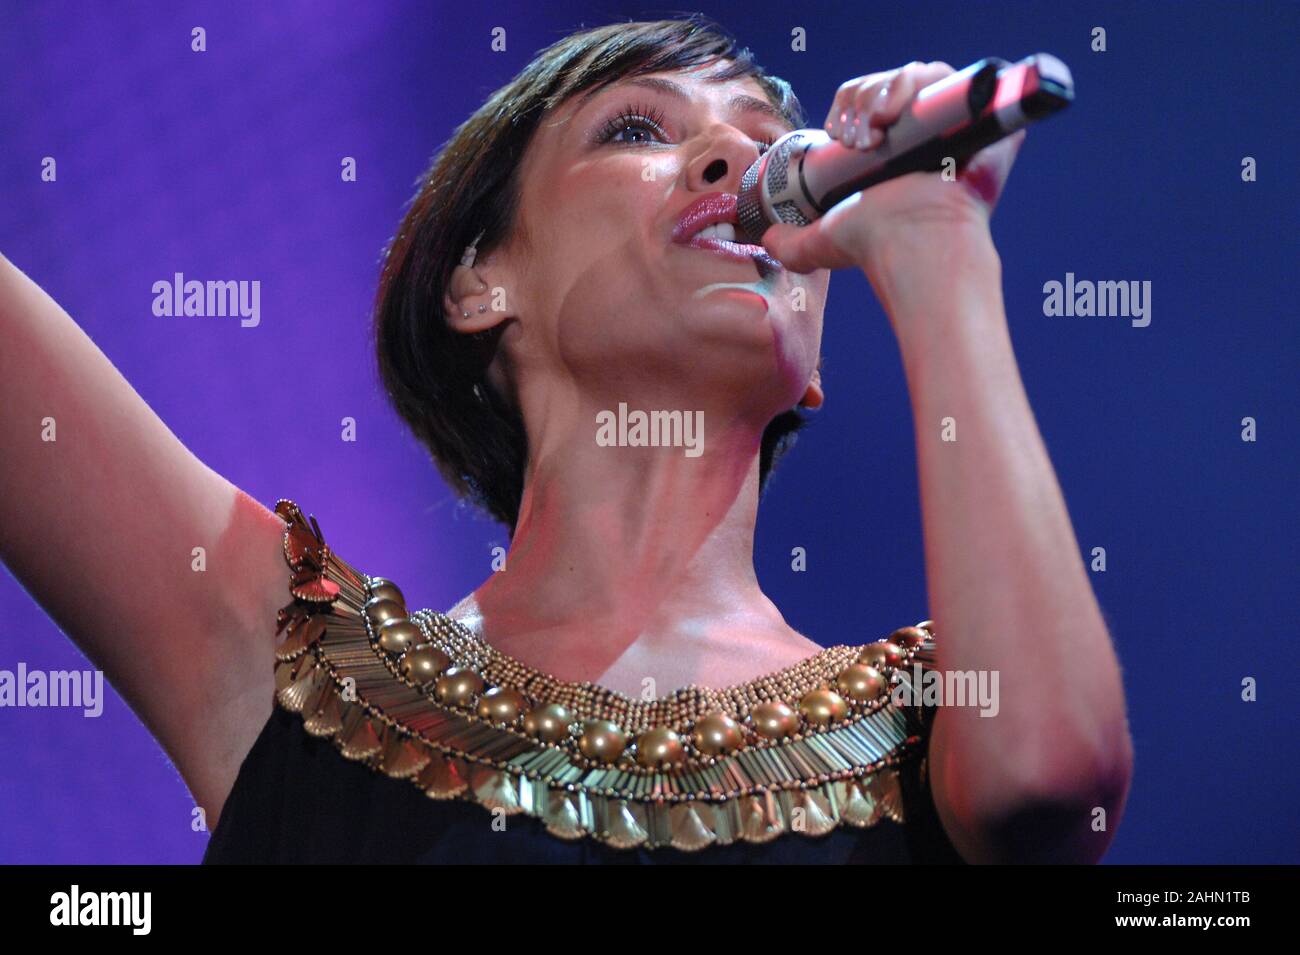 Verona Italy 09/07/2007 :  Natalie Imbruglia in concert during the musical event 'Festivalbar 2007'. Stock Photo